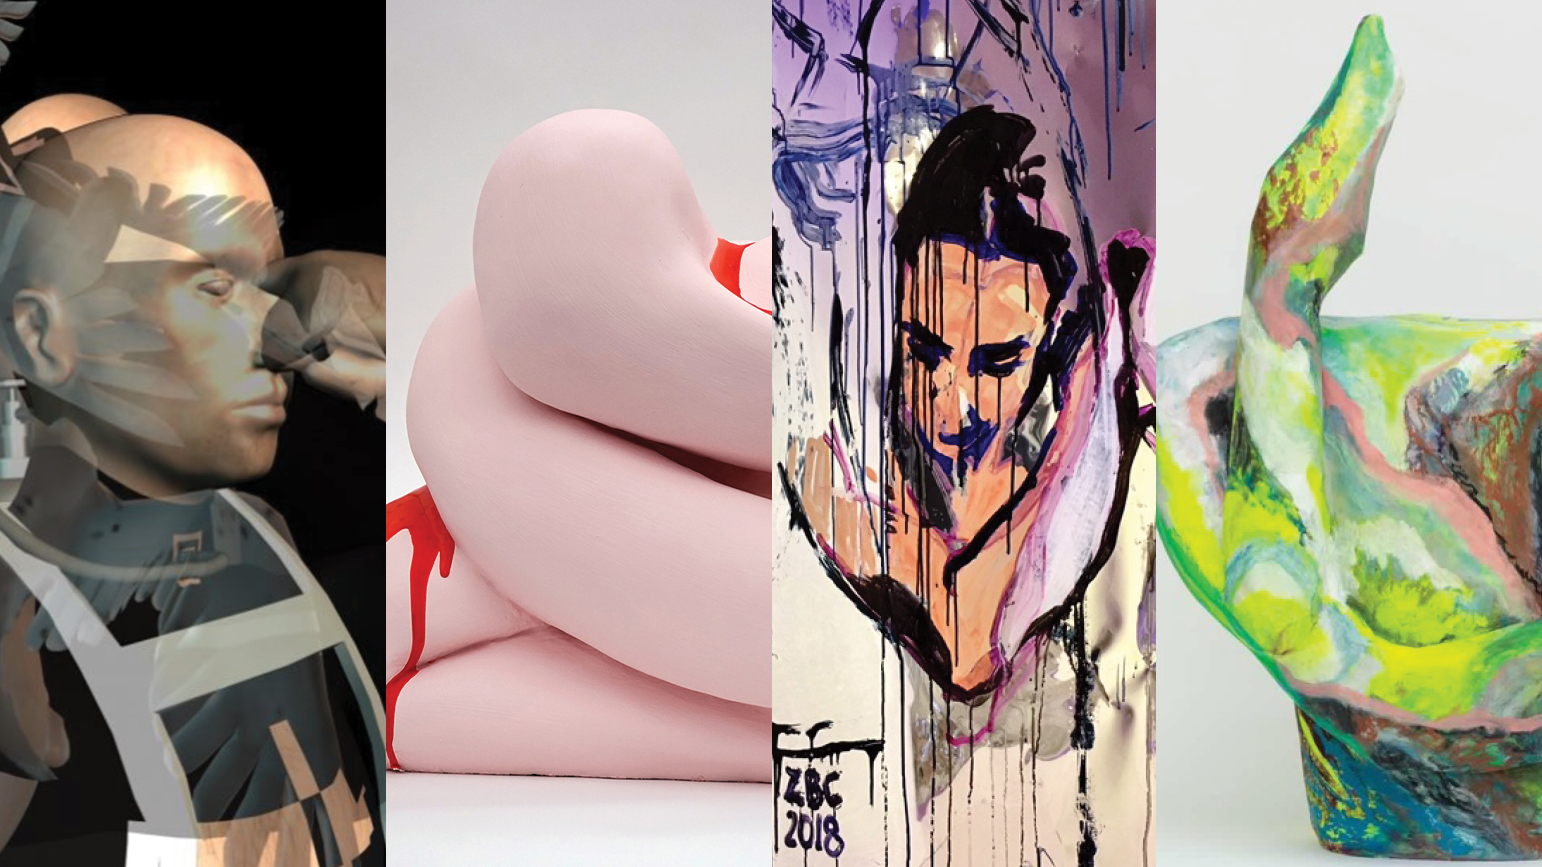 Four image: 1 - Digital image of a man in gold, white, and black, 2 - pink sculpture abstract sculpture with drips of red, 3- painting of a woman 4- abstract sculpture in green, pink, blue, and other colors